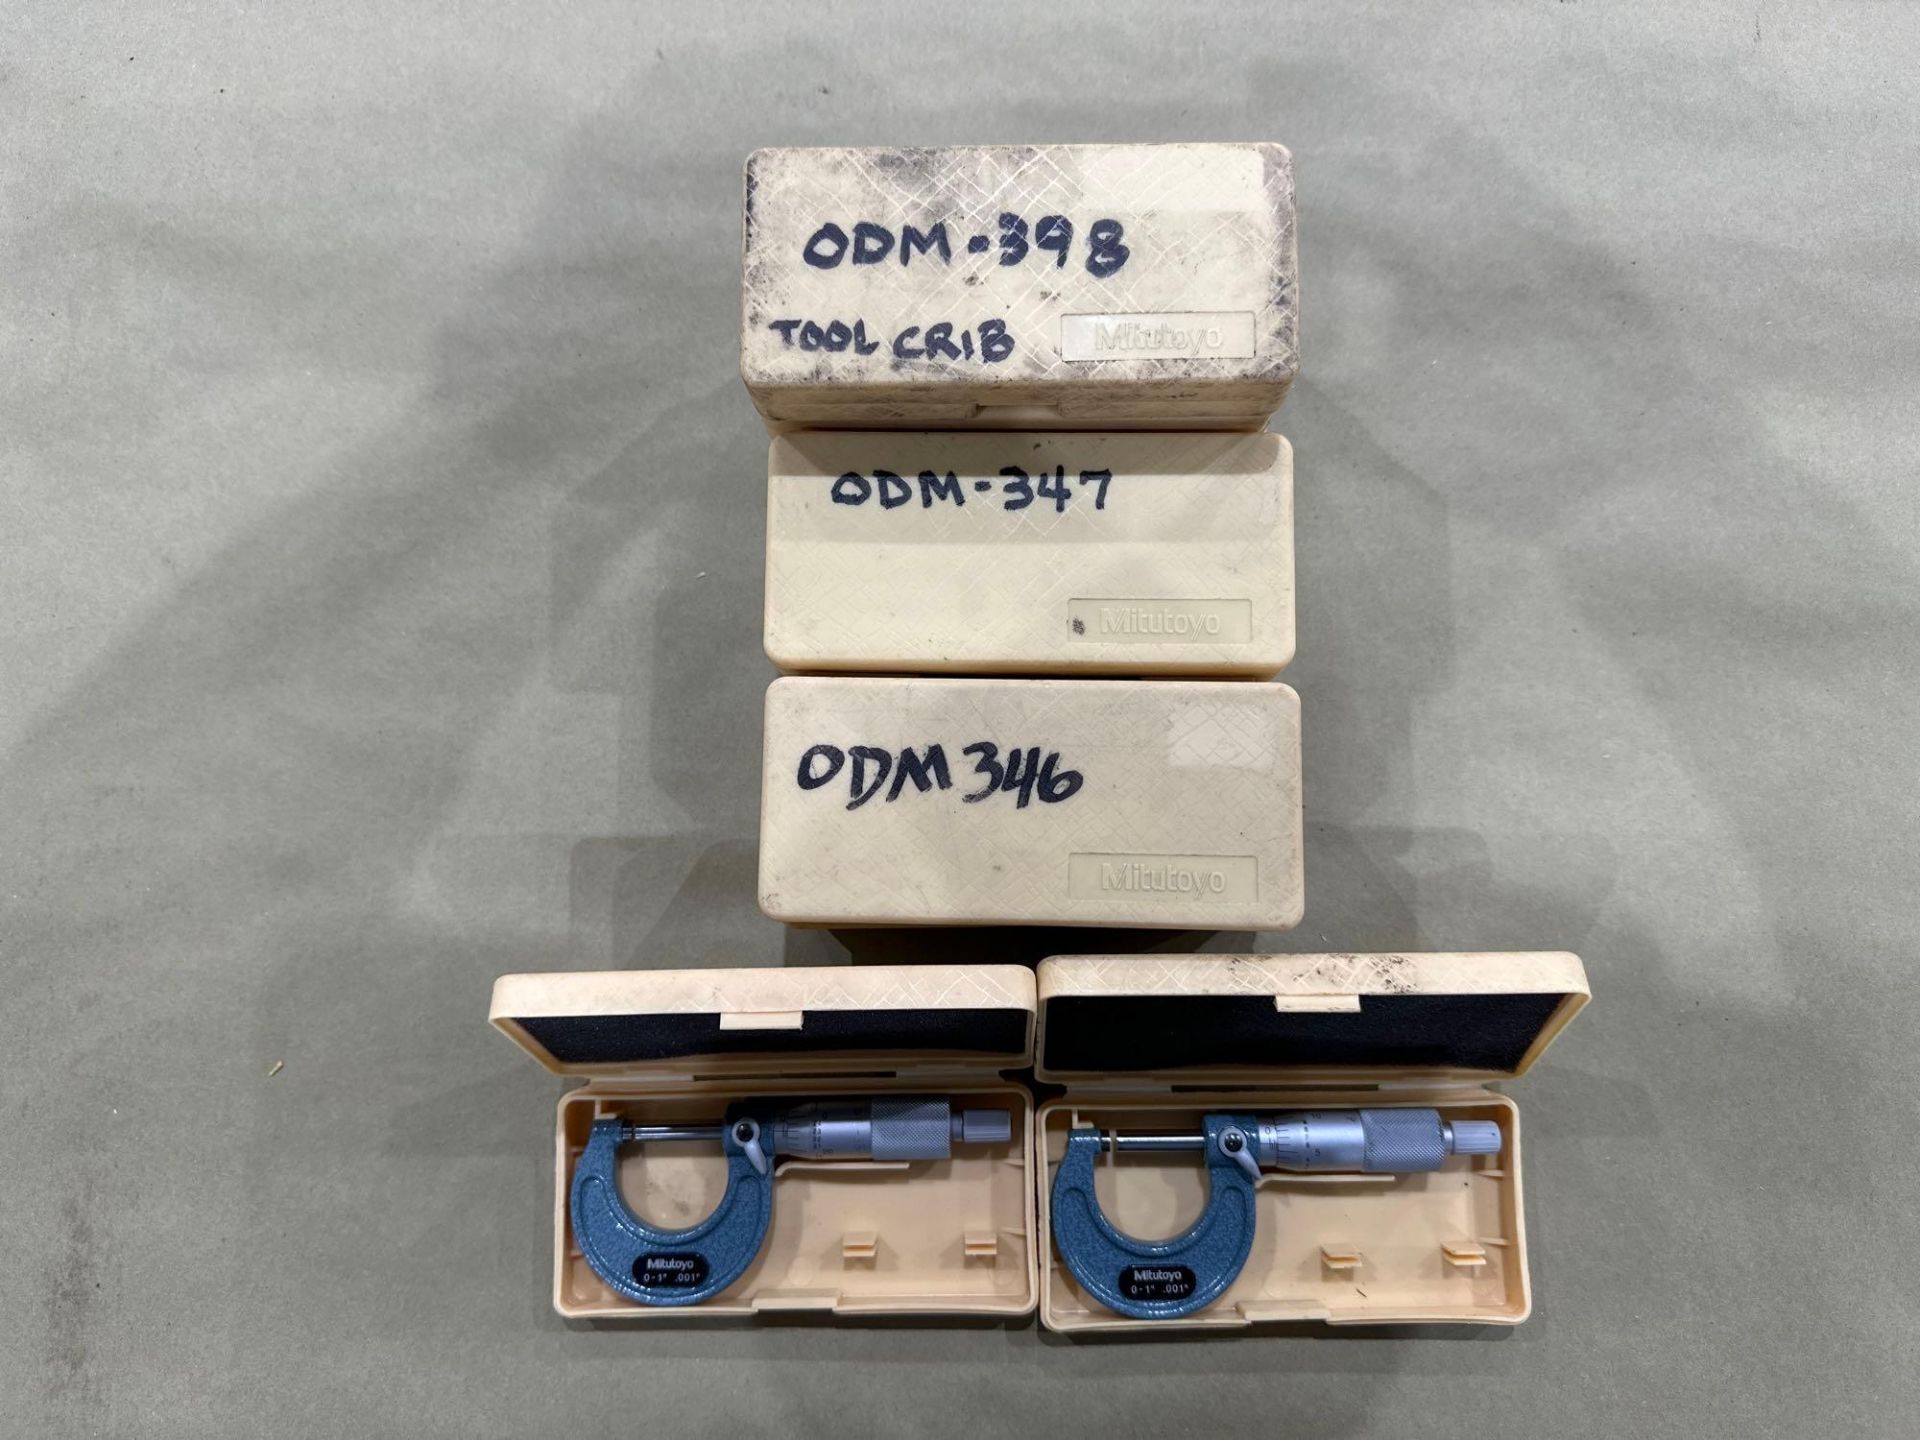 Lot of 12: Mitutoyo Mechanical OD Micrometer M110-1”, 0-1” Range, .001” Graduation, in plastic boxes - Image 7 of 7